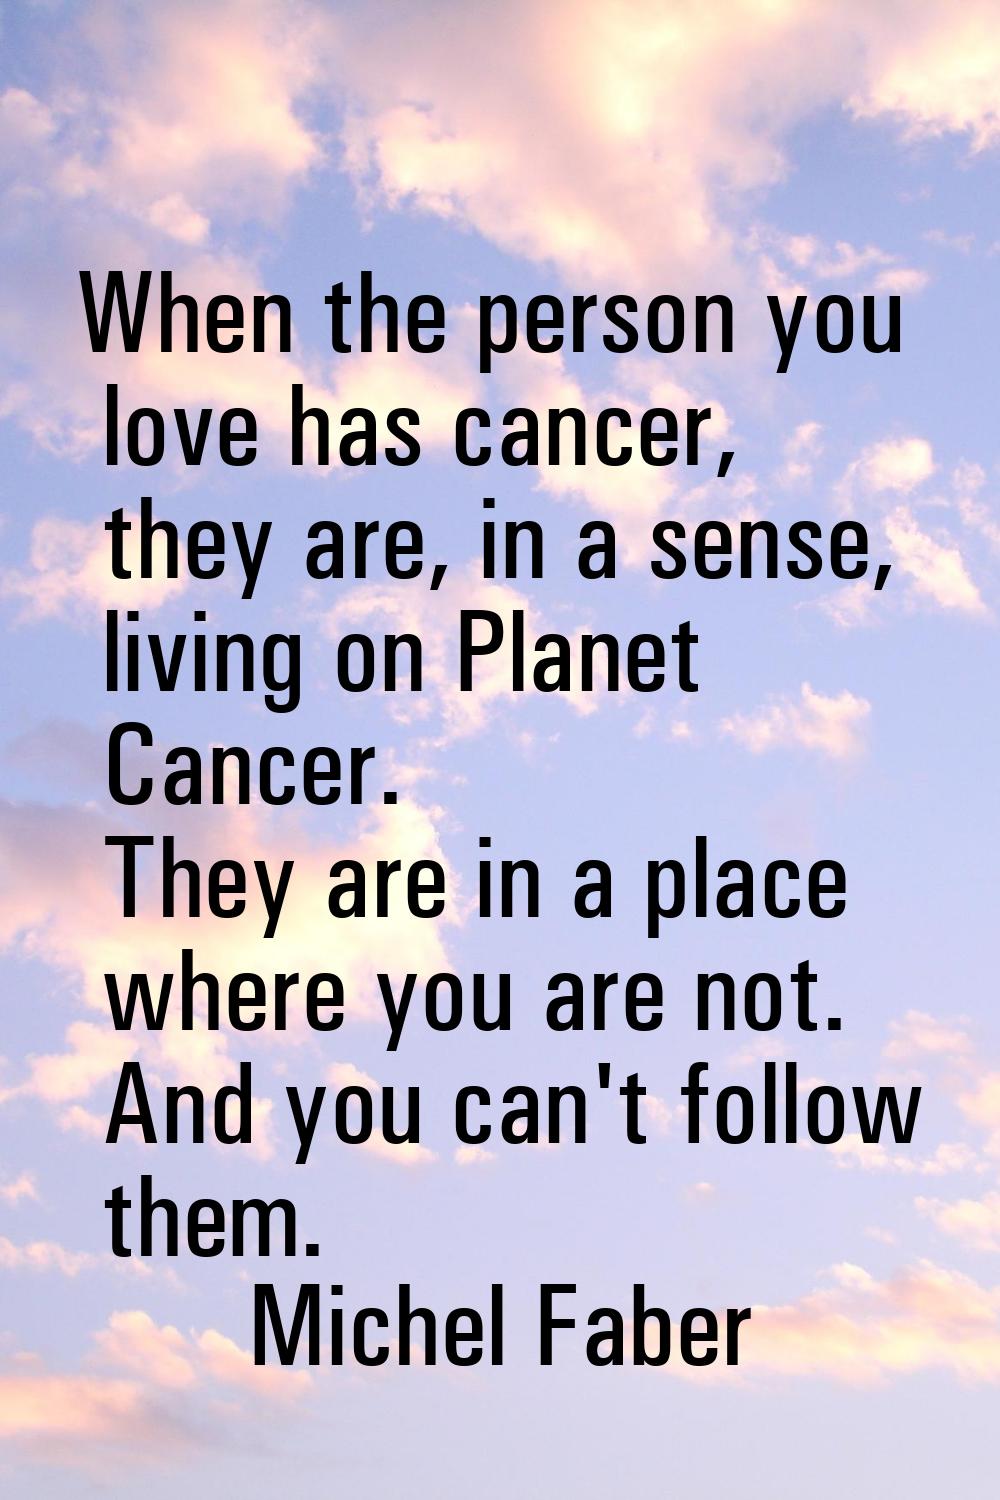 When the person you love has cancer, they are, in a sense, living on Planet Cancer. They are in a p